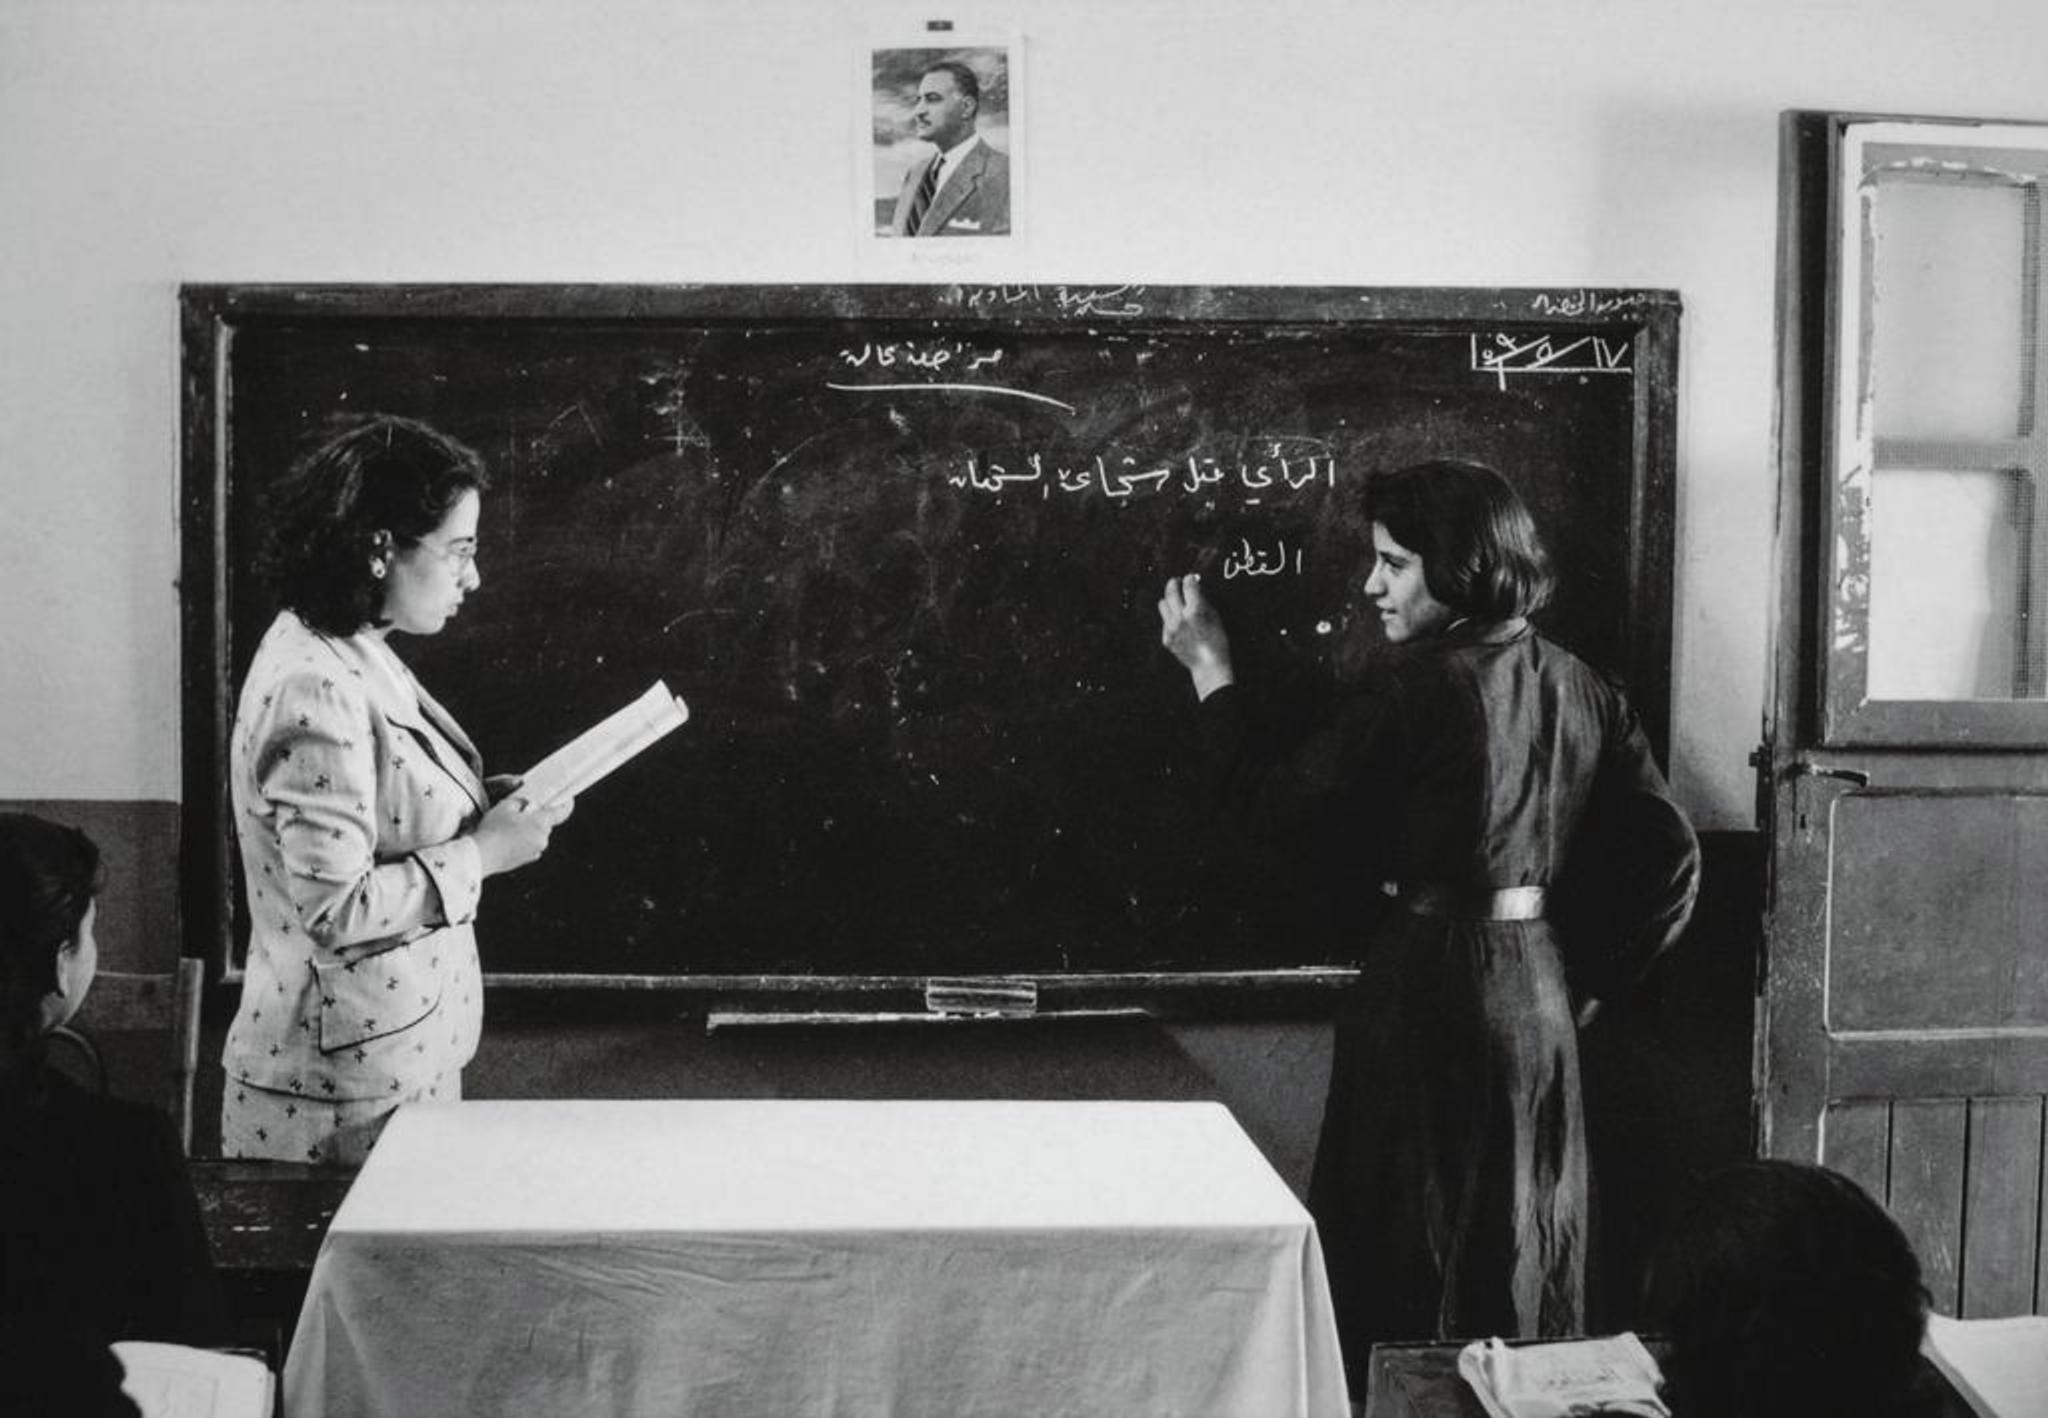 A female teacher and female student standing in front of a blackboard, they look at each other. The teacher holds a sheet of paper, the student writes on the board.